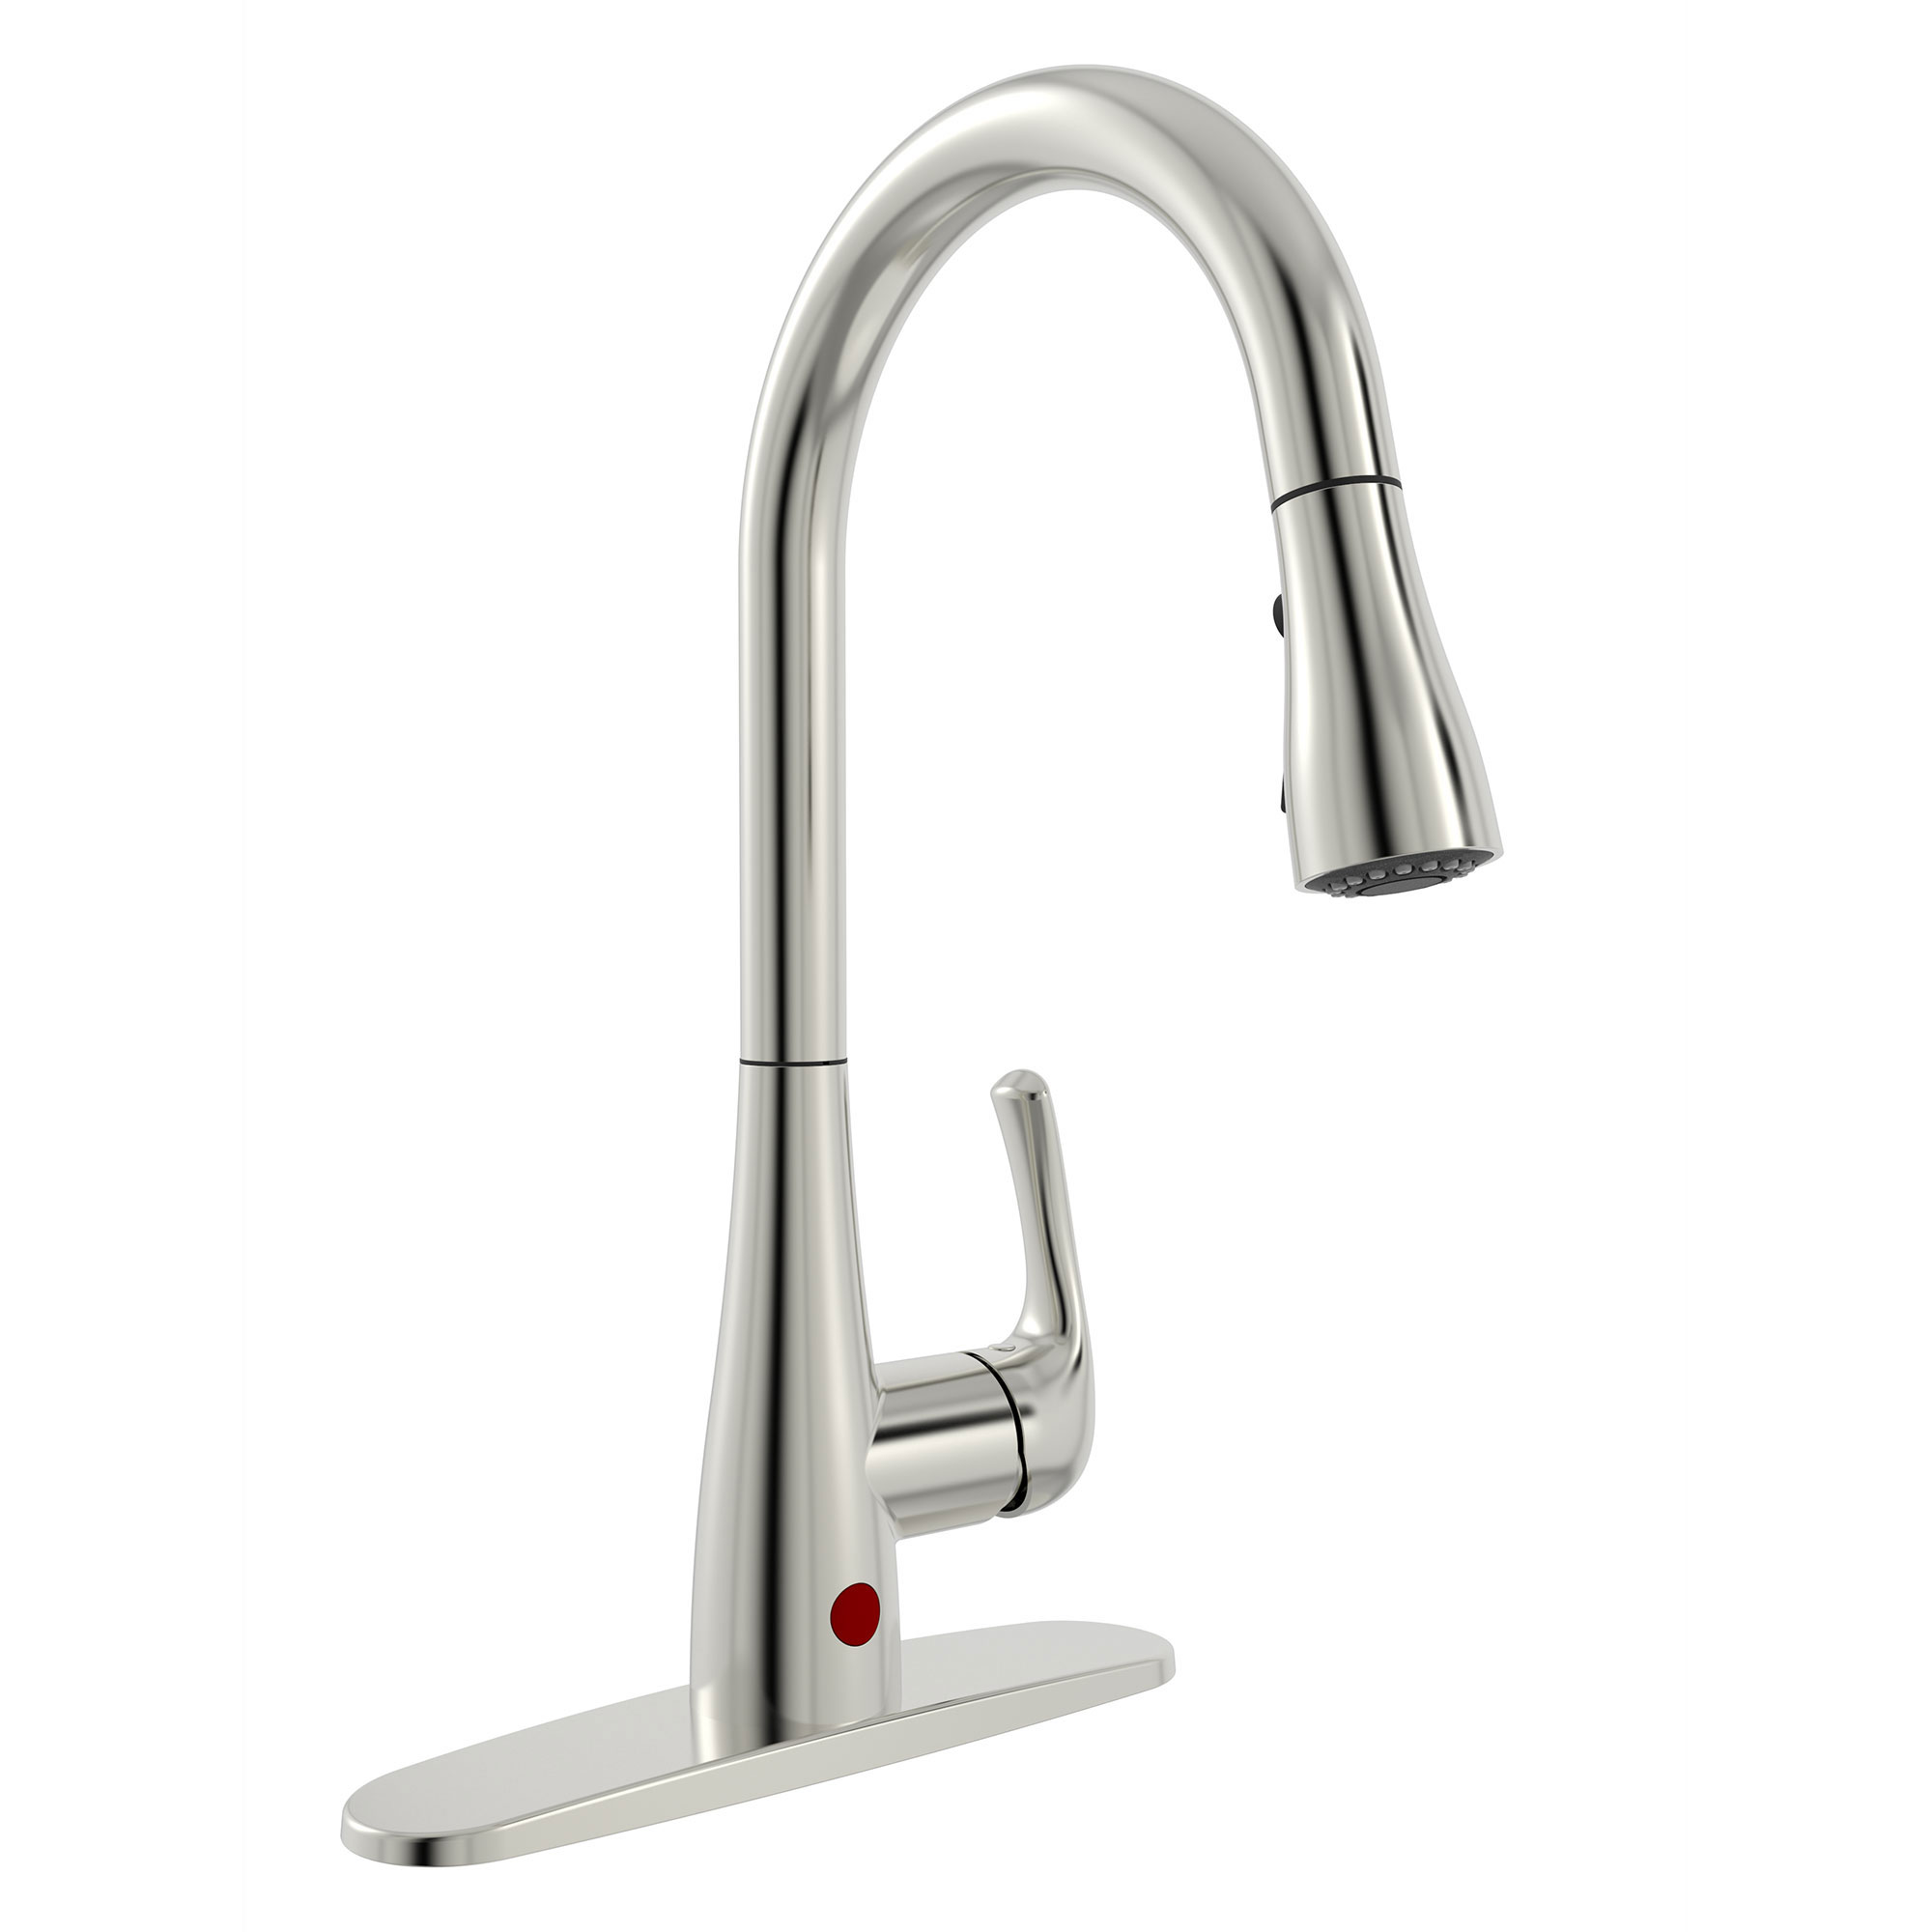 Nex76cbn Movement Sensor Kitchen Sink Faucet With Pull Down Spout & 1 Handle, Brushed Nickel